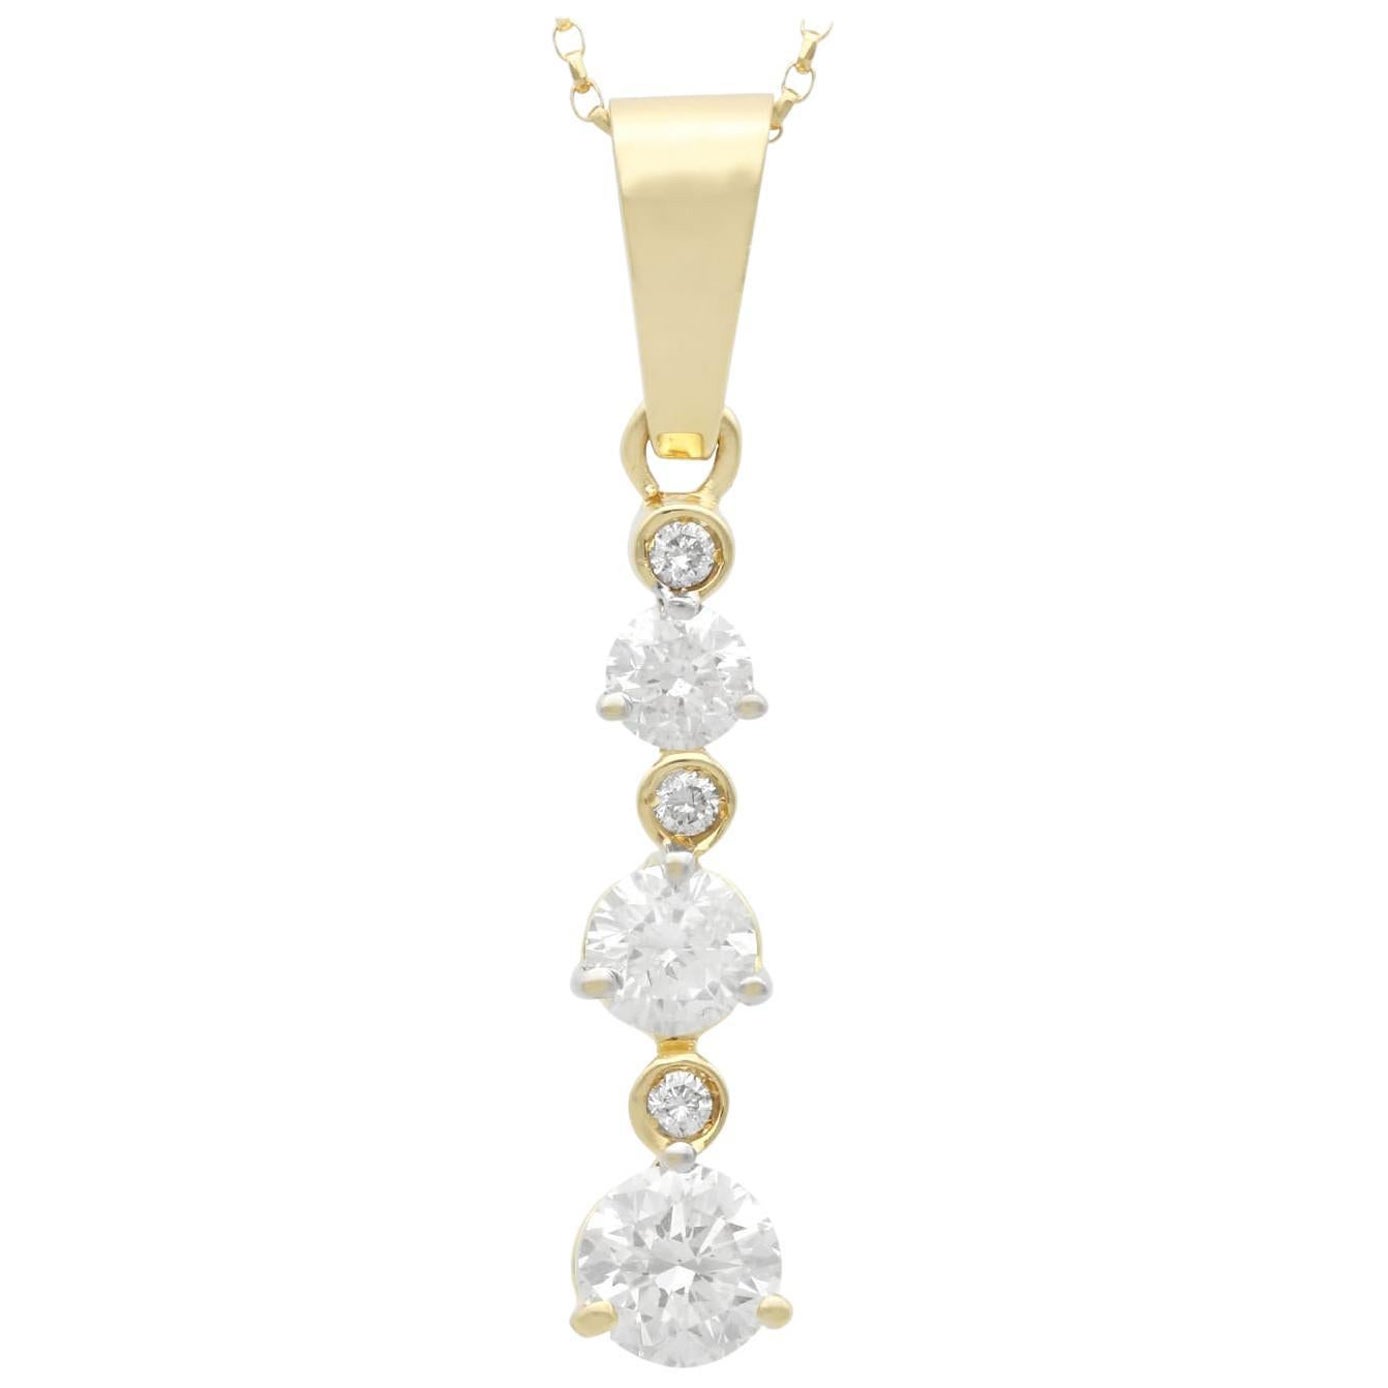 Vintage 90s 1.98 Carat Diamond and 14k Yellow Gold Pendant For Sale